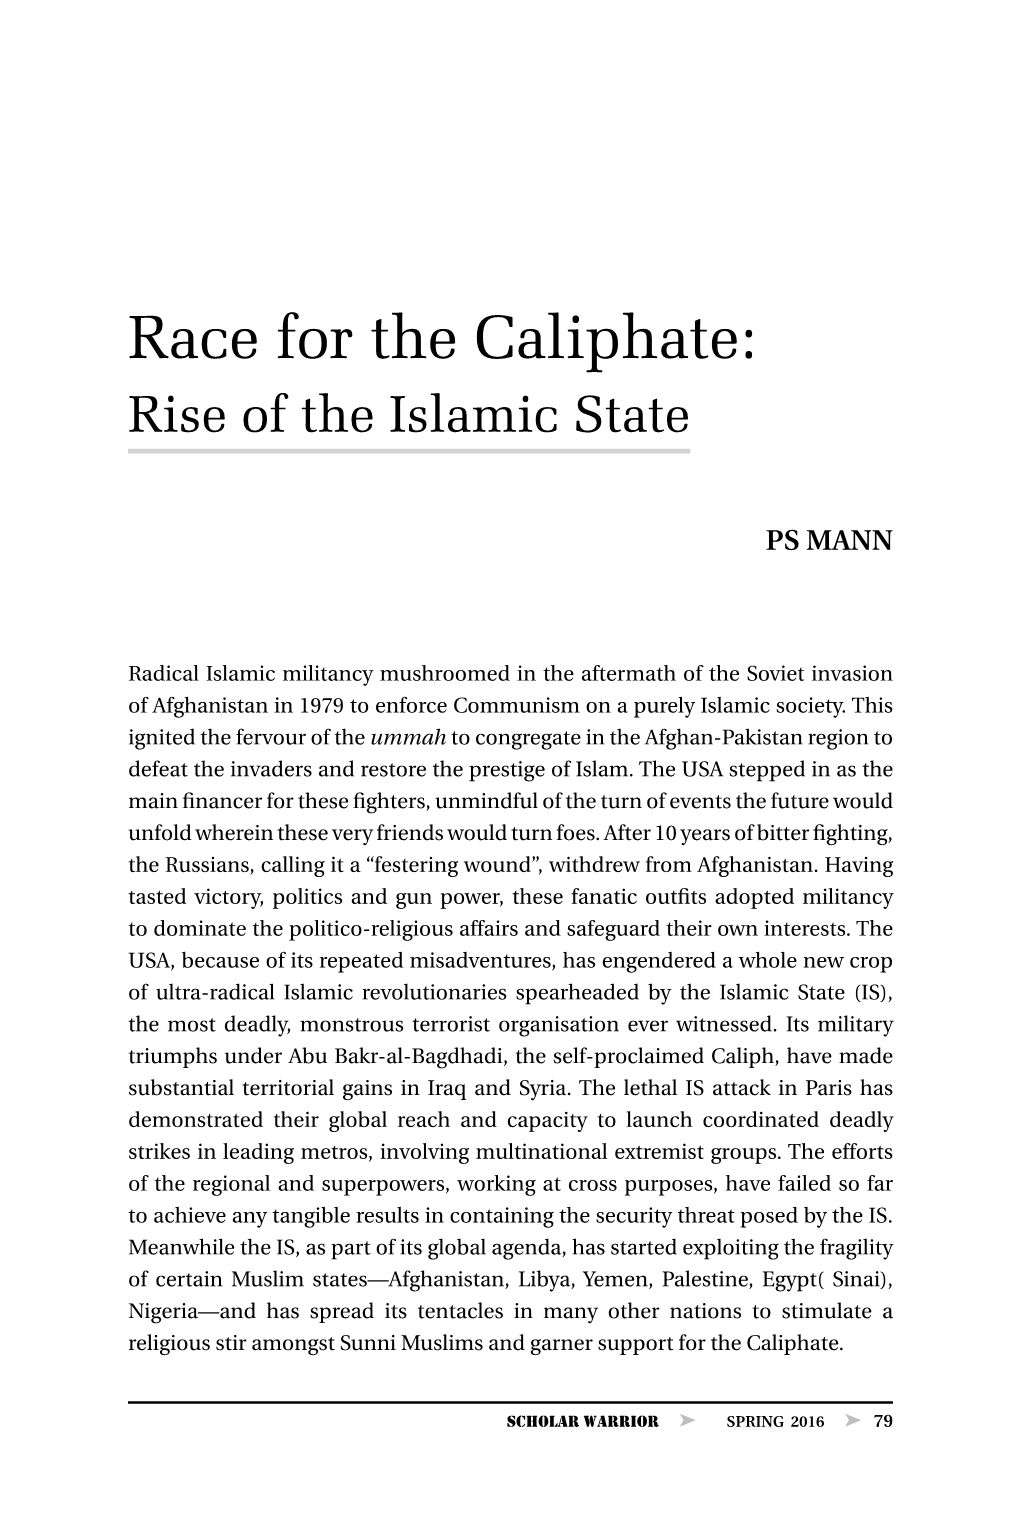 Race for the Caliphate: Rise of the Islamic State, by PS Mann